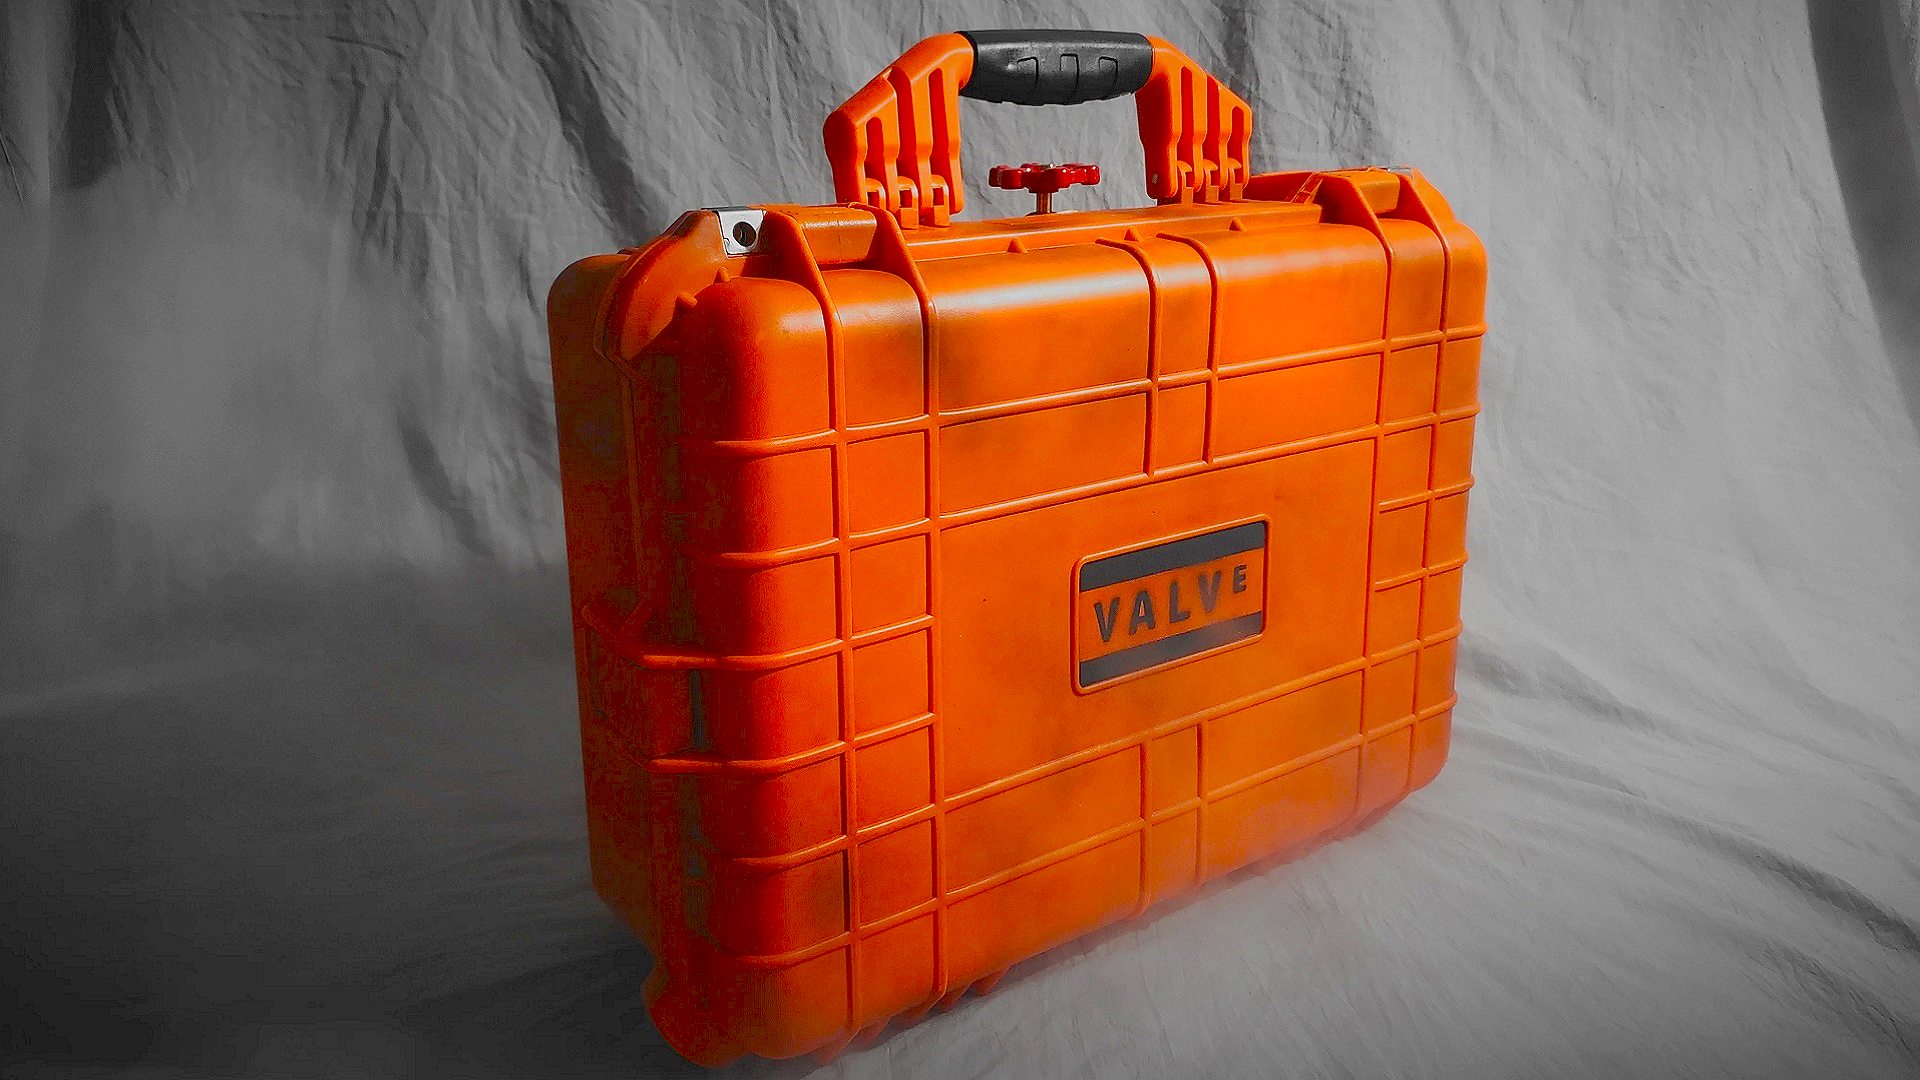 This Steam Deck case is a neat tribute to Valve's Orange Box